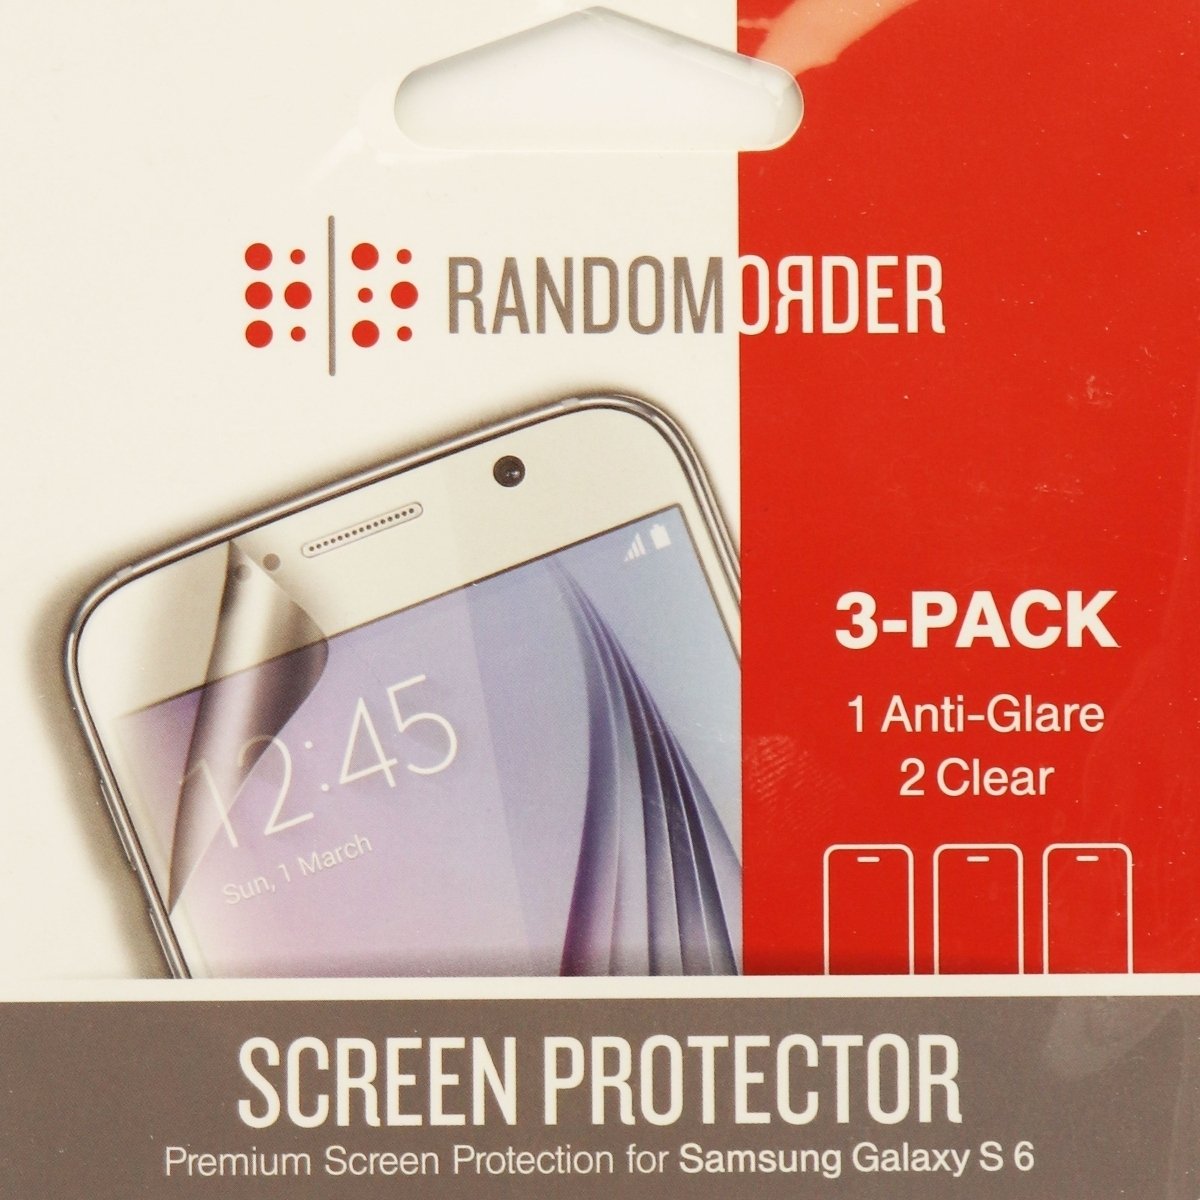 Random Order Screen Protector 3 Pack For Samsung Galaxy S6